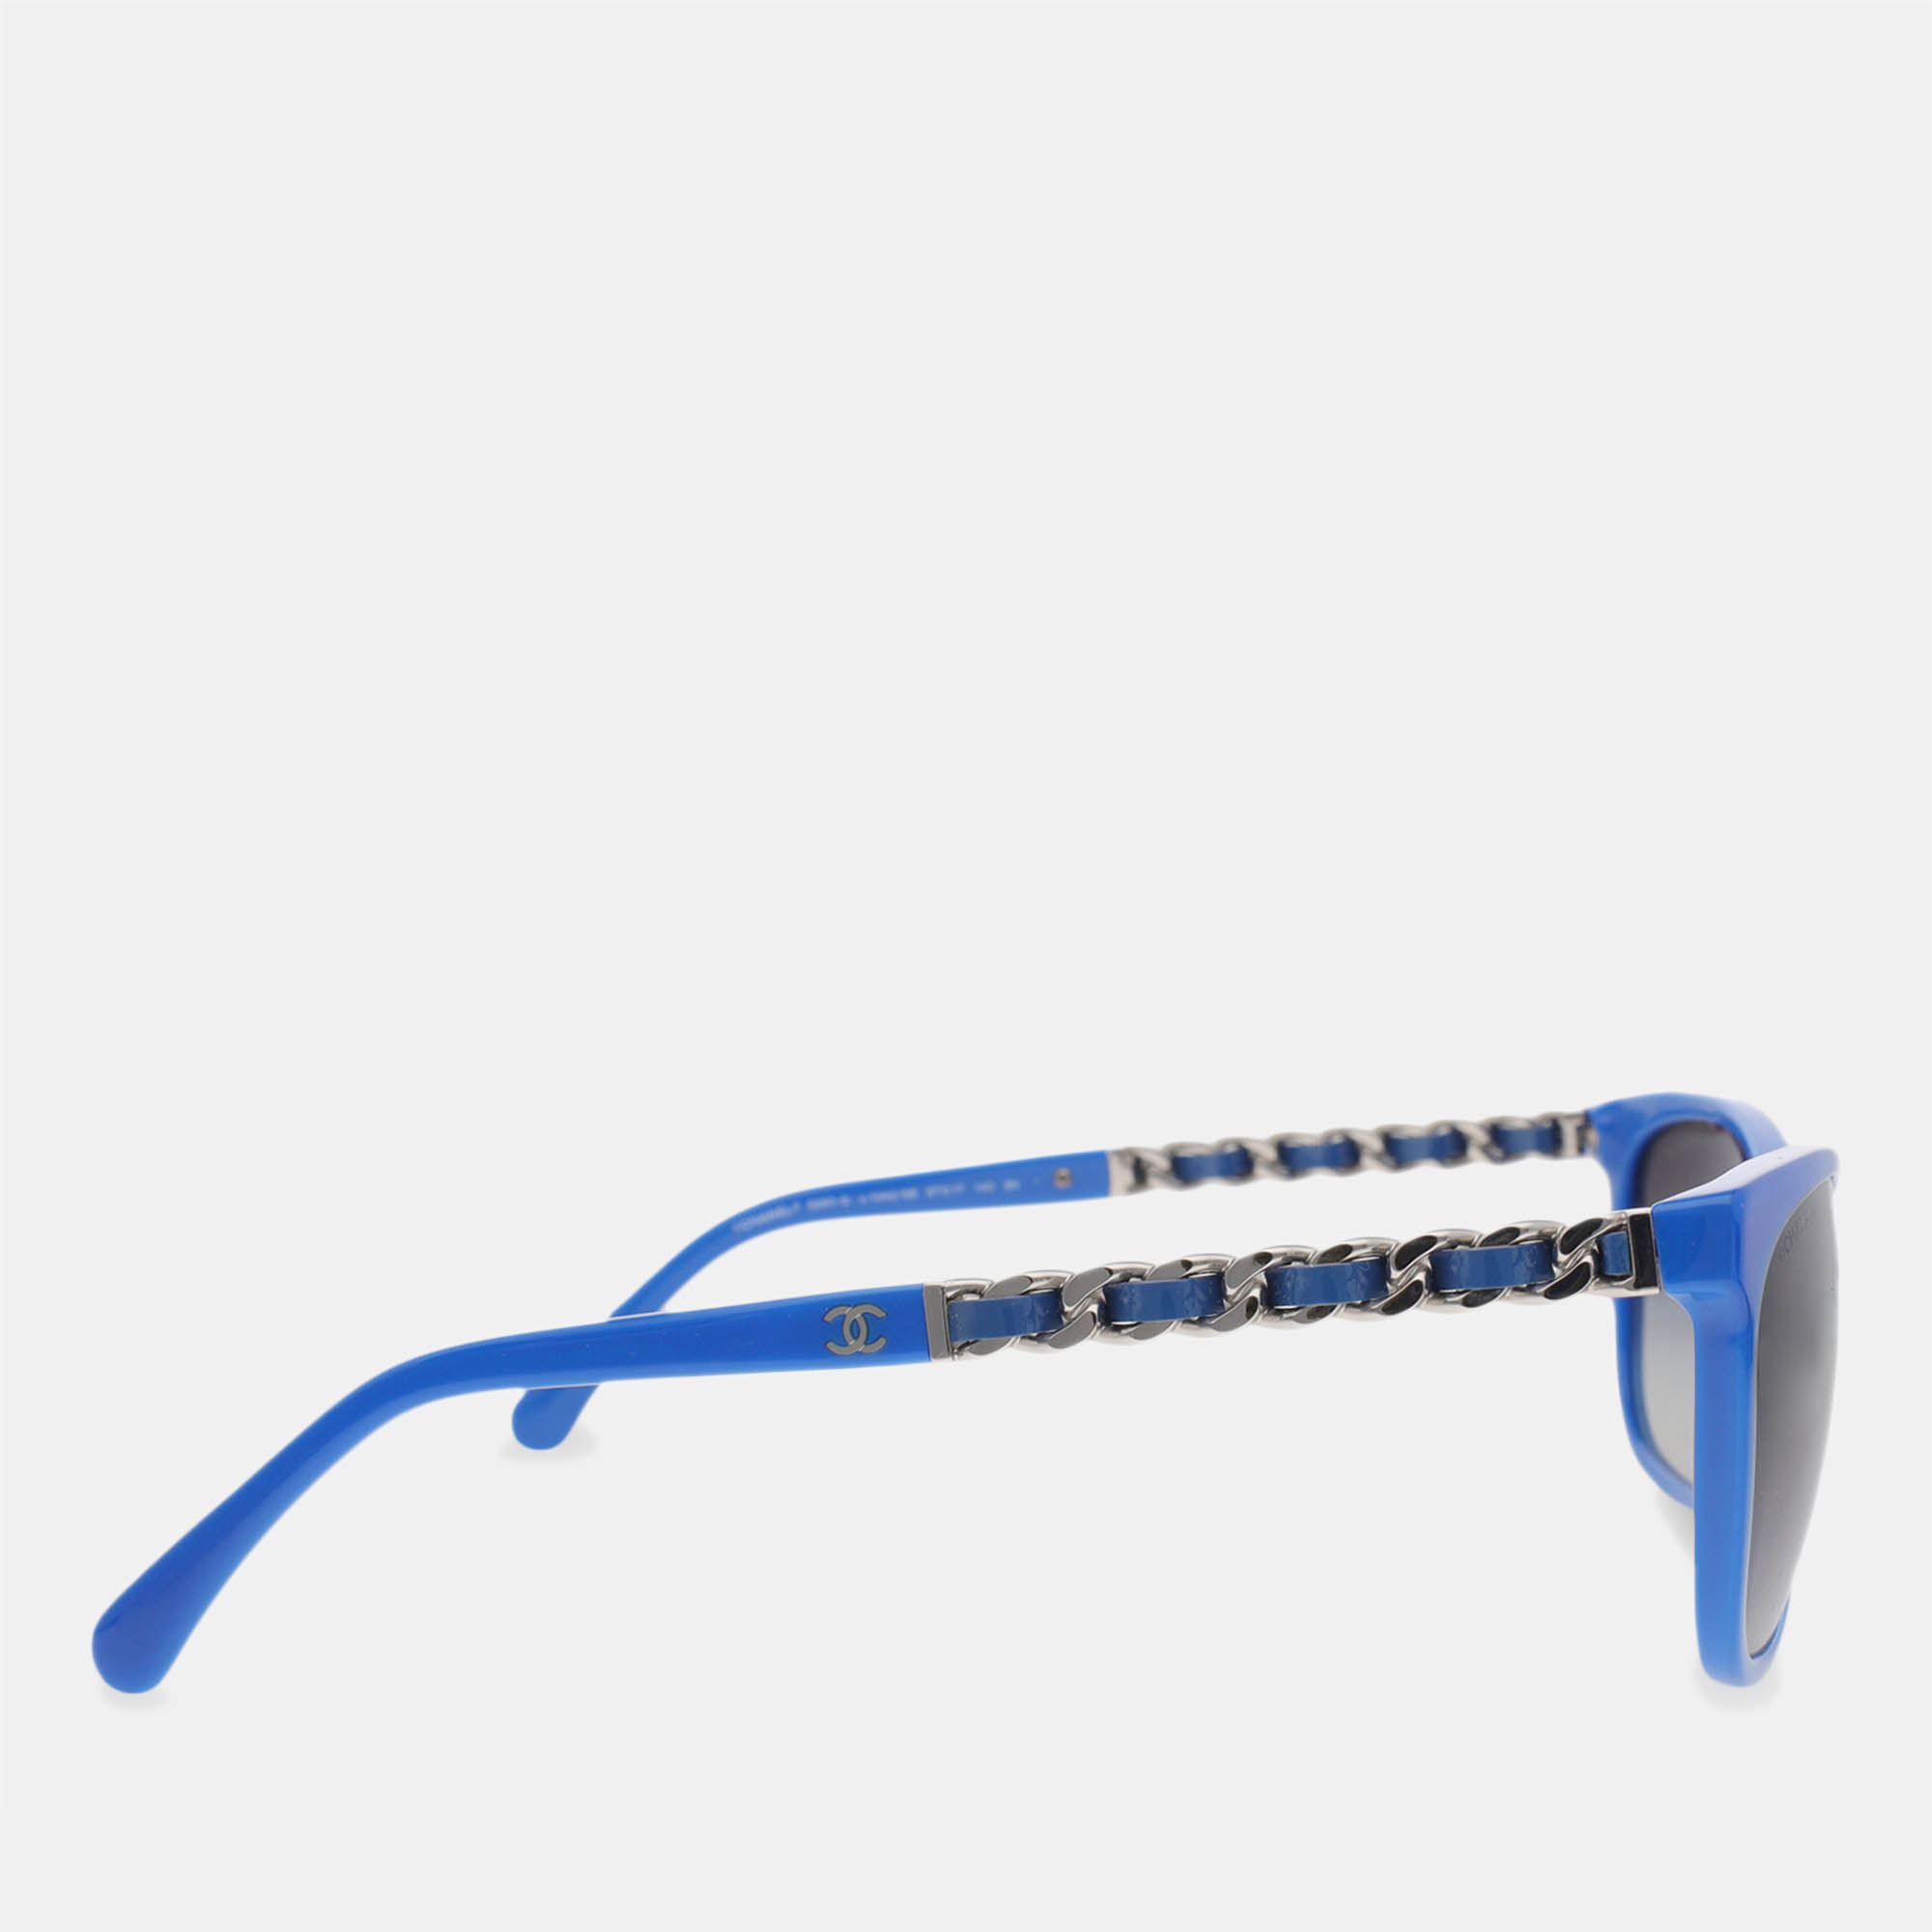 Chanel  Women's Synthetic Fibers Squared Frame Sunglasses - Blue - One Size